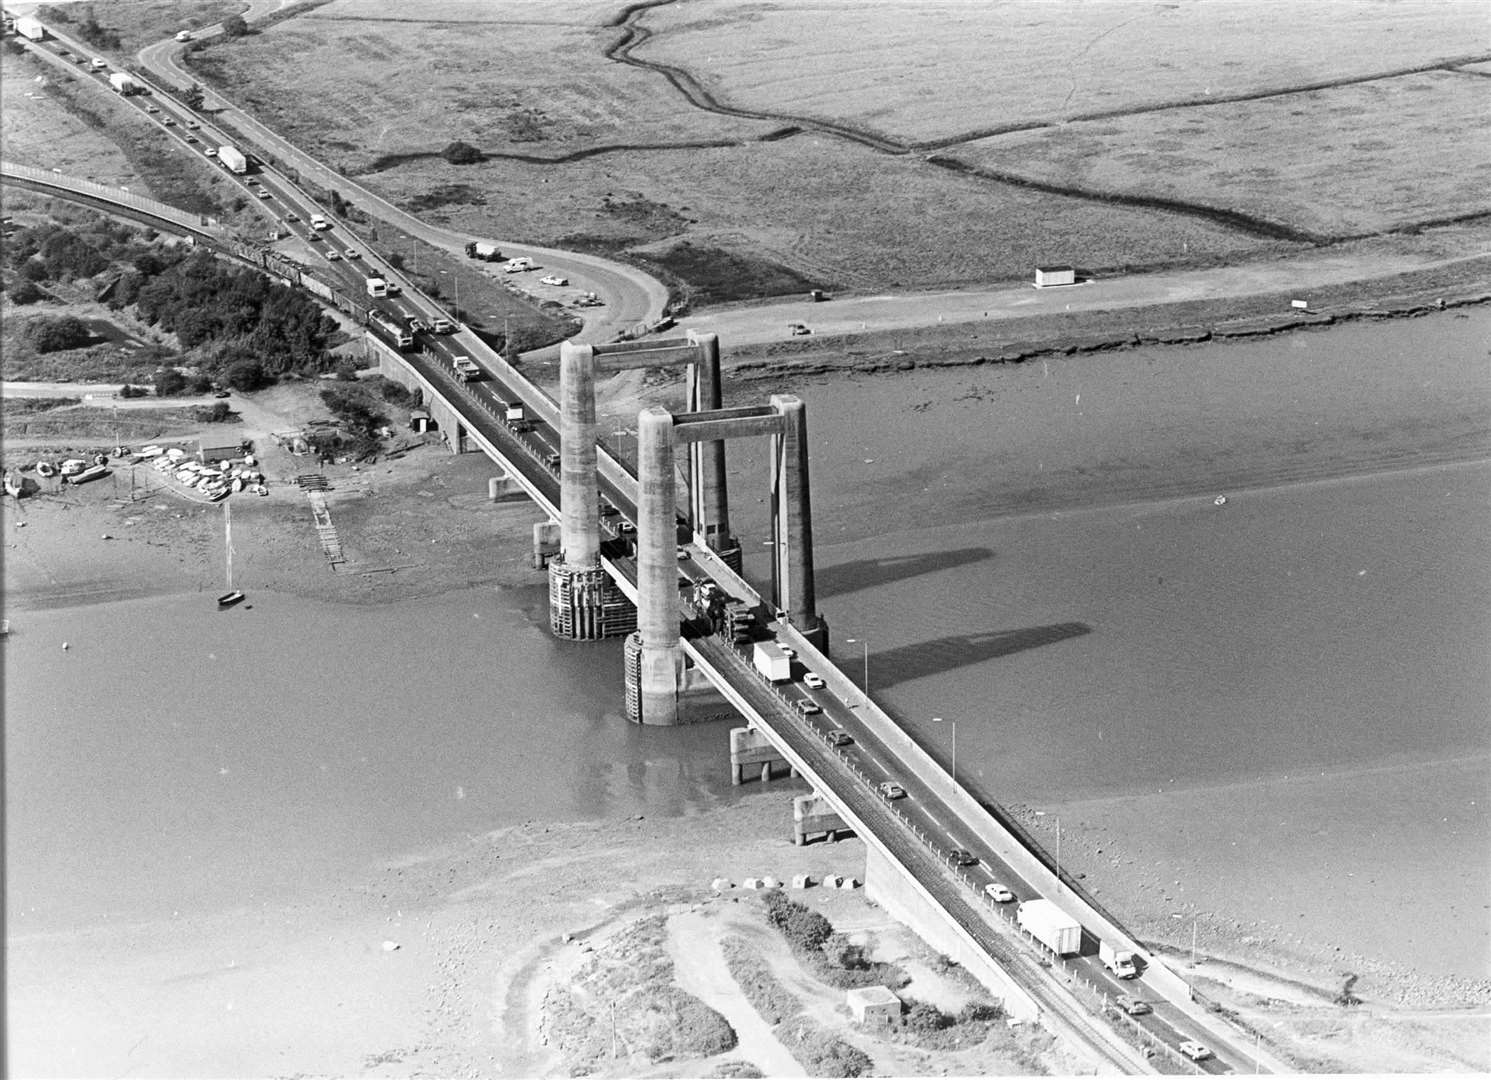 Aerial view of Kingsferry Bridge in 1990. The volume of traffic on the bridge has decreased since the opening of the Sheppey Crossing in 2006.